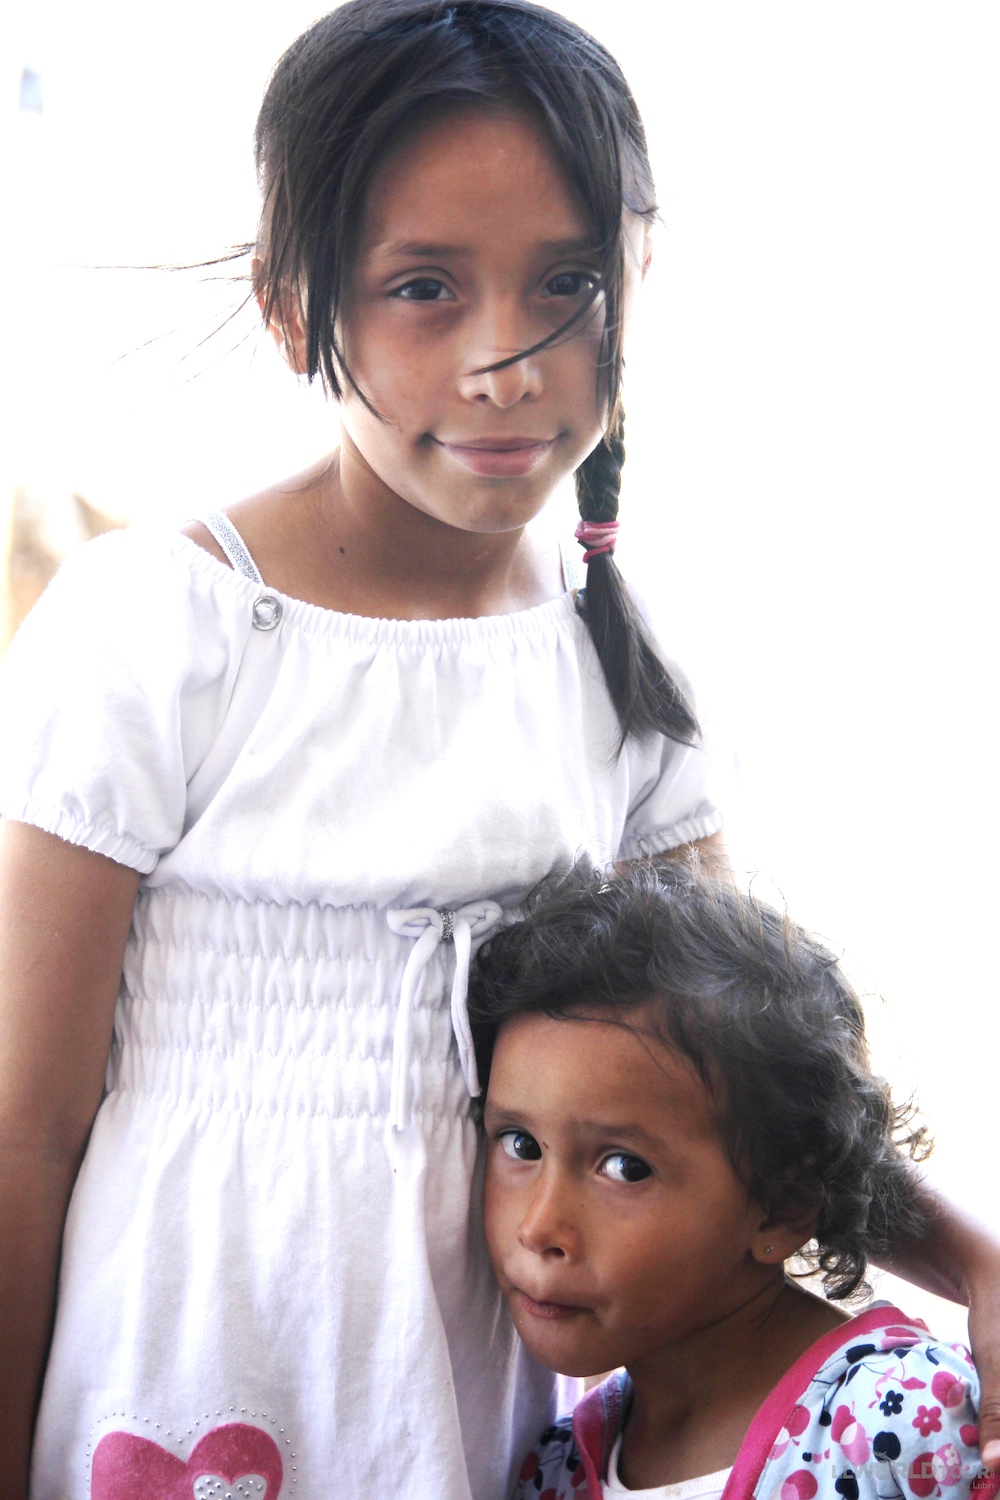 Children of Colombia